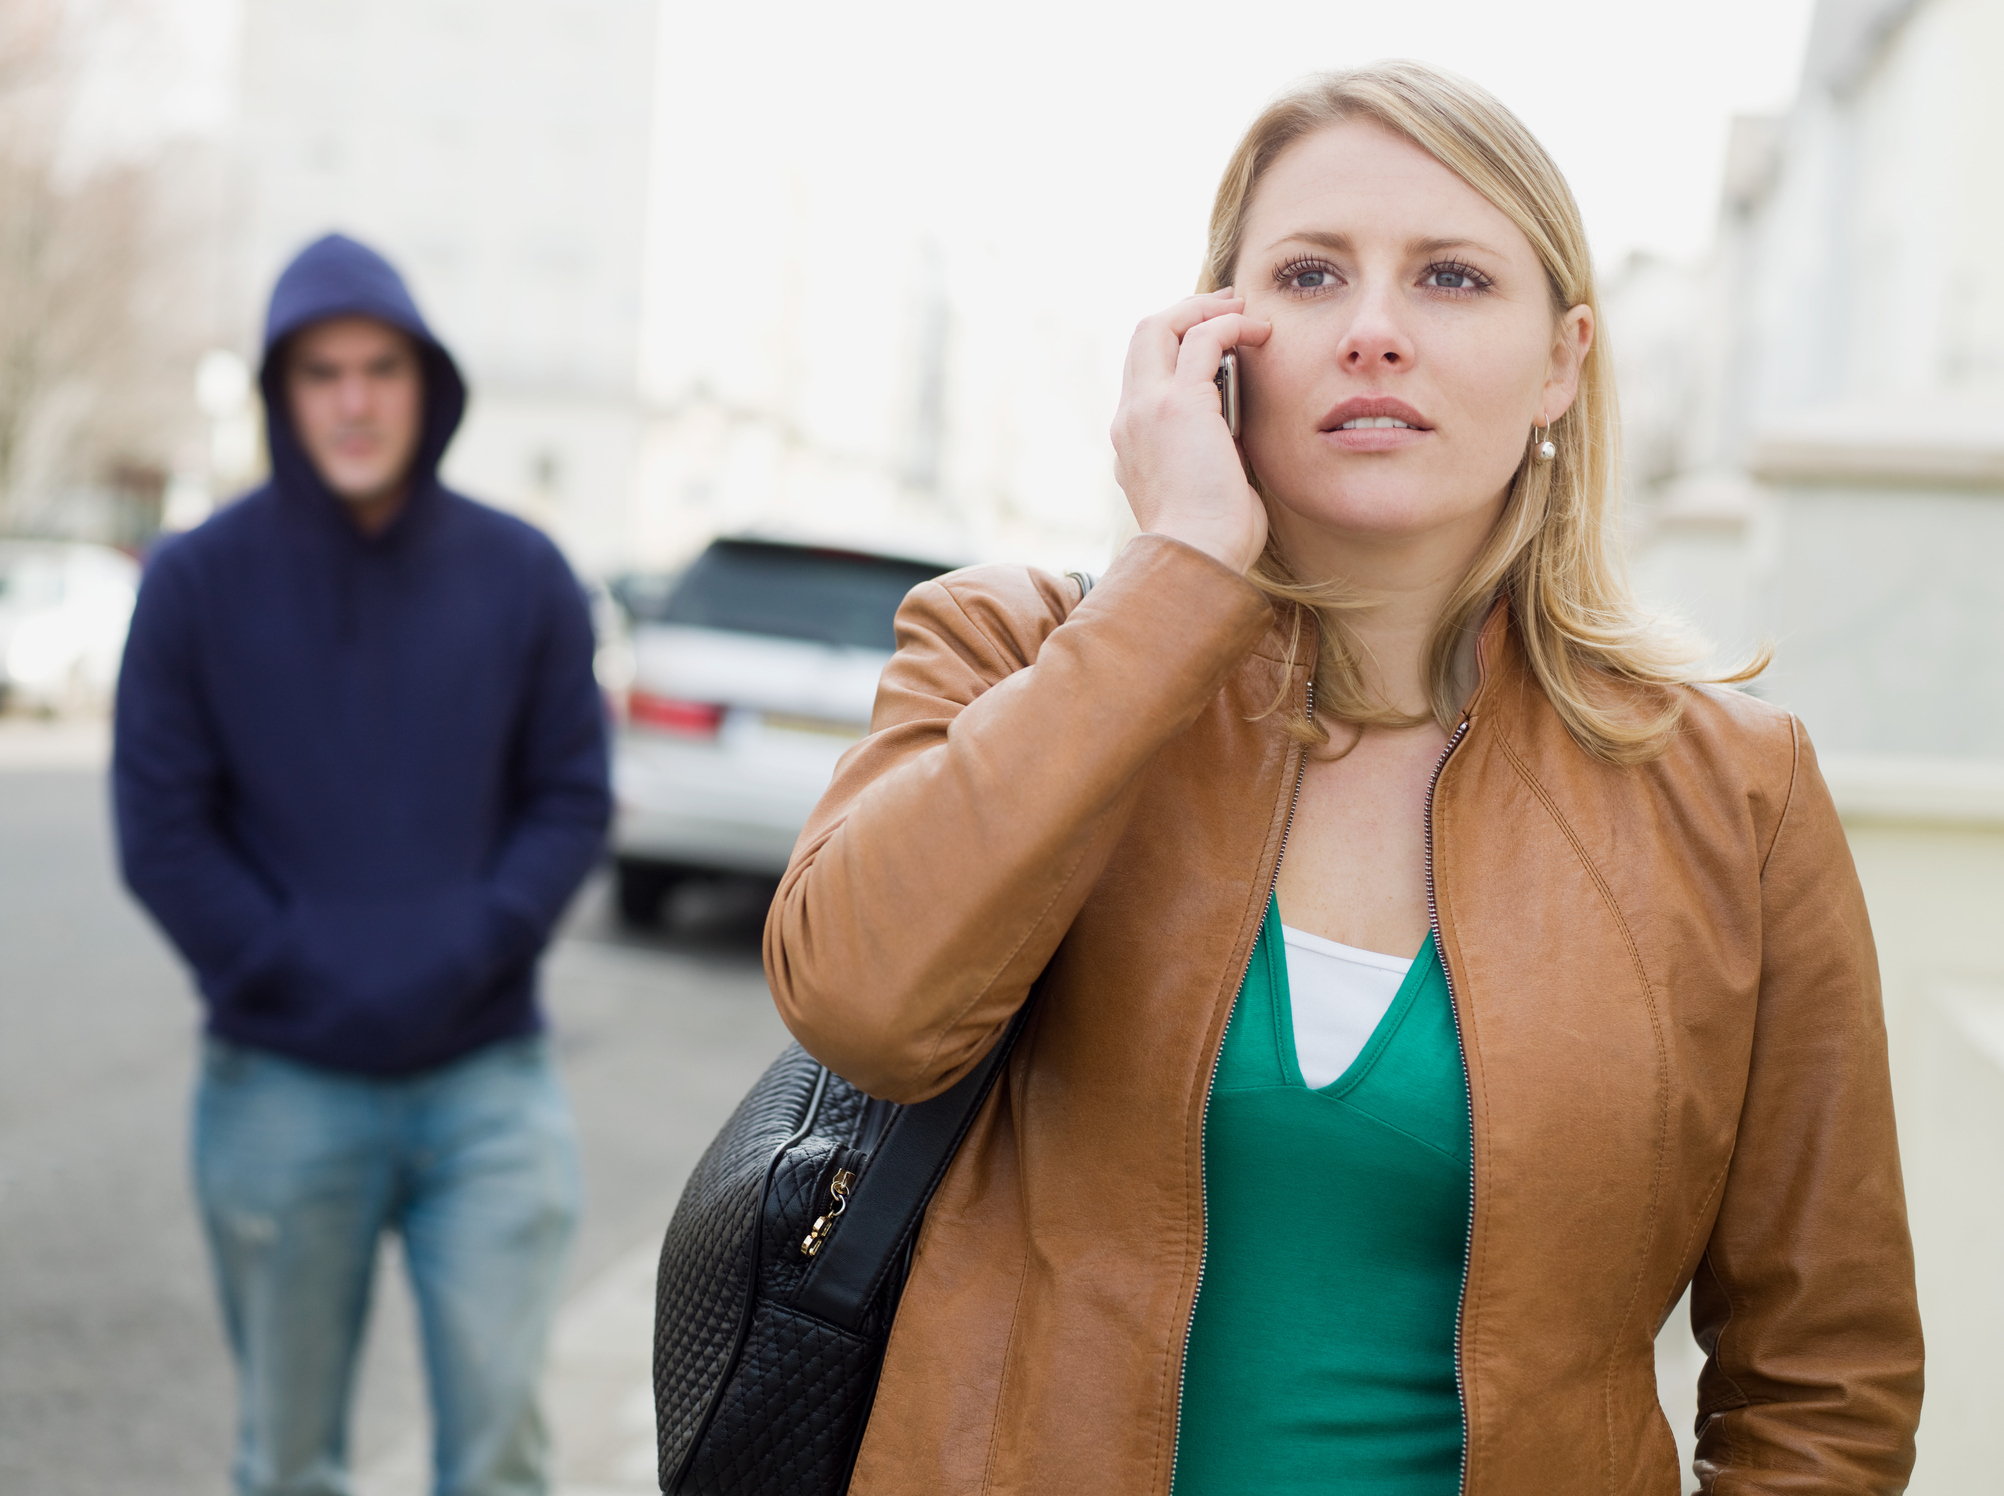 Woman on phone appears uneasy with a hooded figure in the background